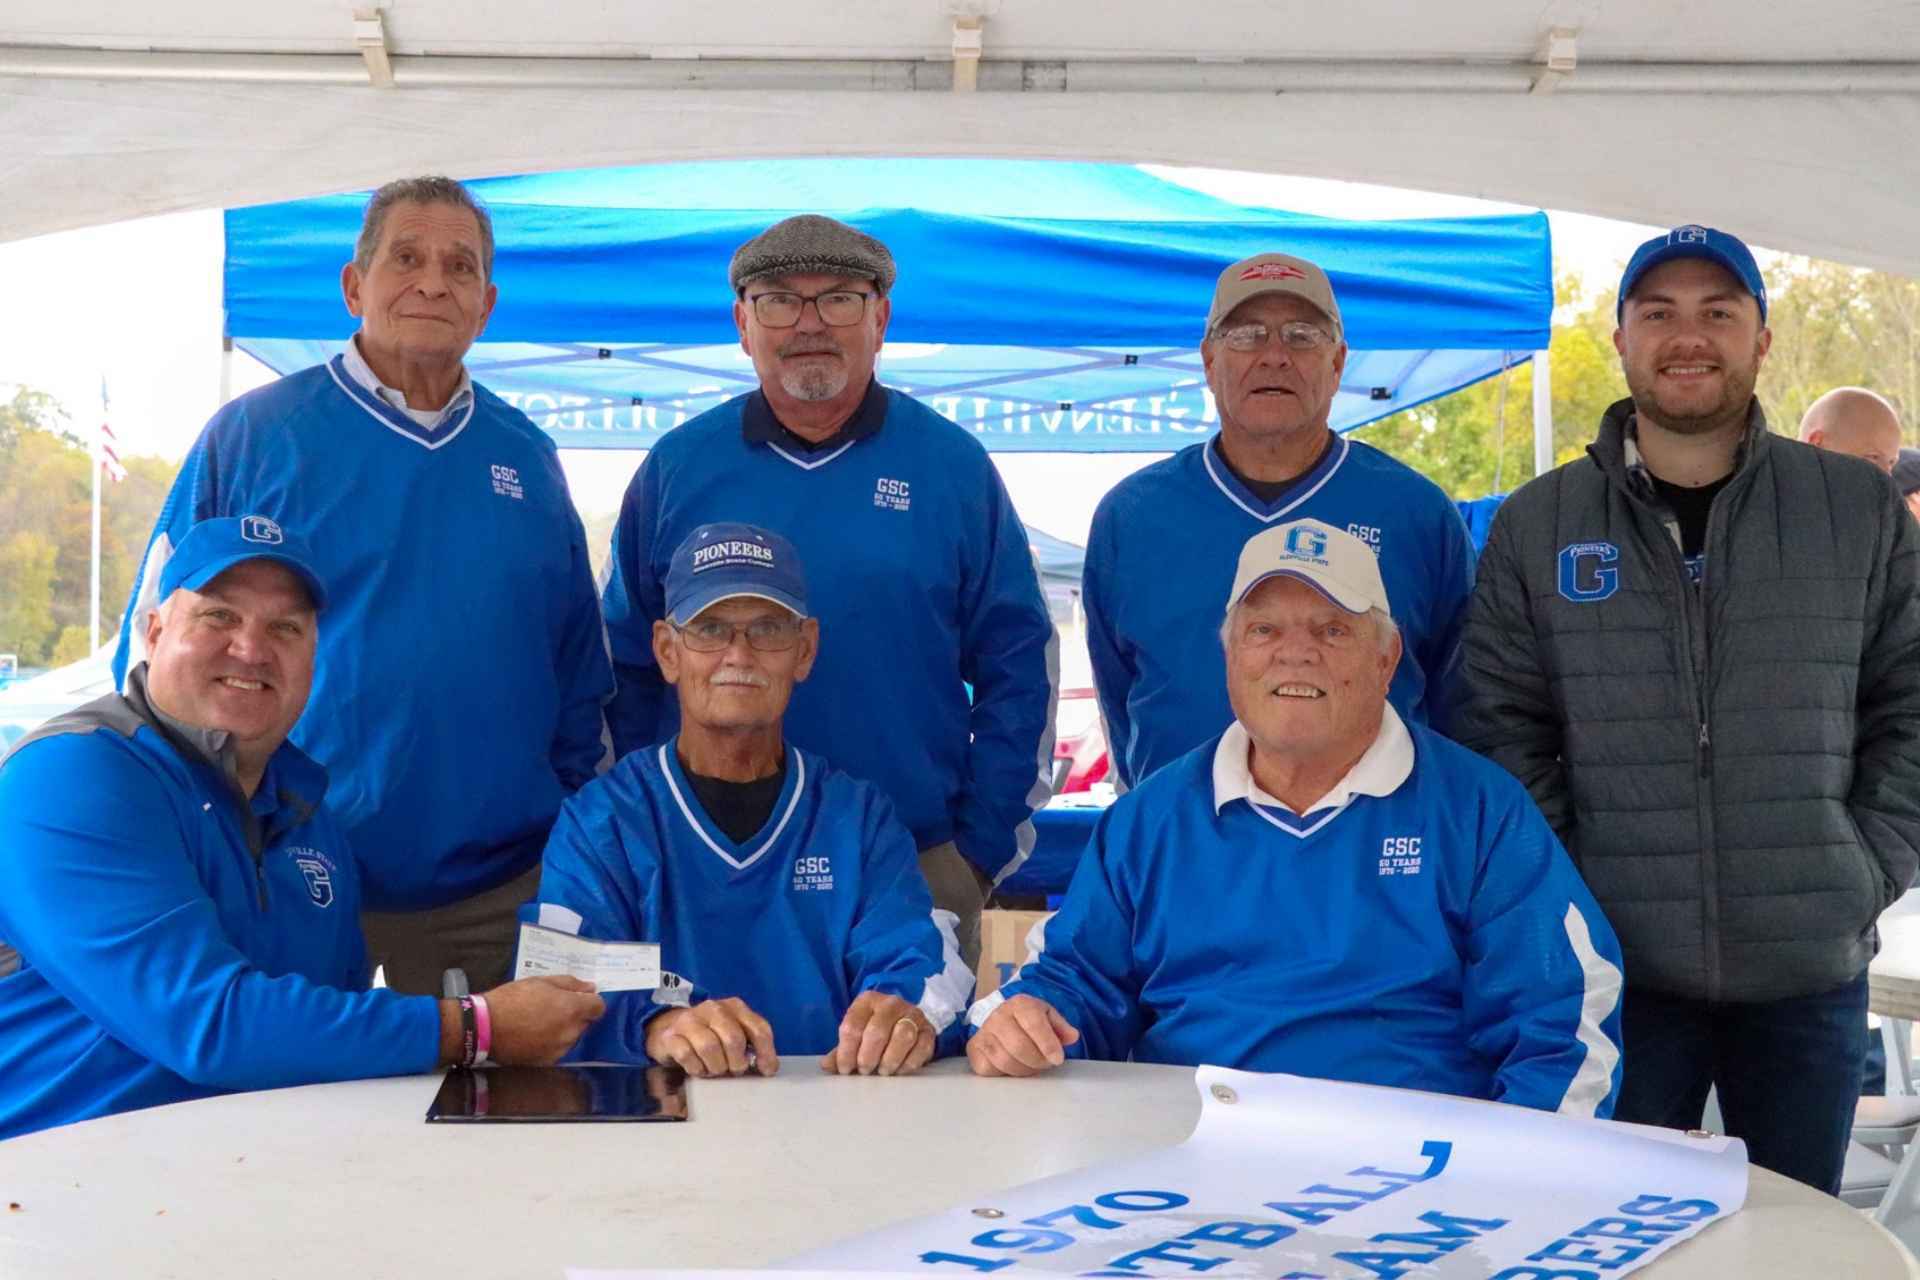 Establishing donors of the Glenville State College Athletic Trainer Scholarship with GSC’s Vice President for Advancement, David Hutchison, and Director of Alumni Relations, Conner Ferguson. Seated (l-r) David Hutchison, Gary Ray, and Ron Duncan; standing Stewart “Mike” Roscoe, Steve Ash, Virgil “Pee Wee” Lacey, and Conner Ferguson.